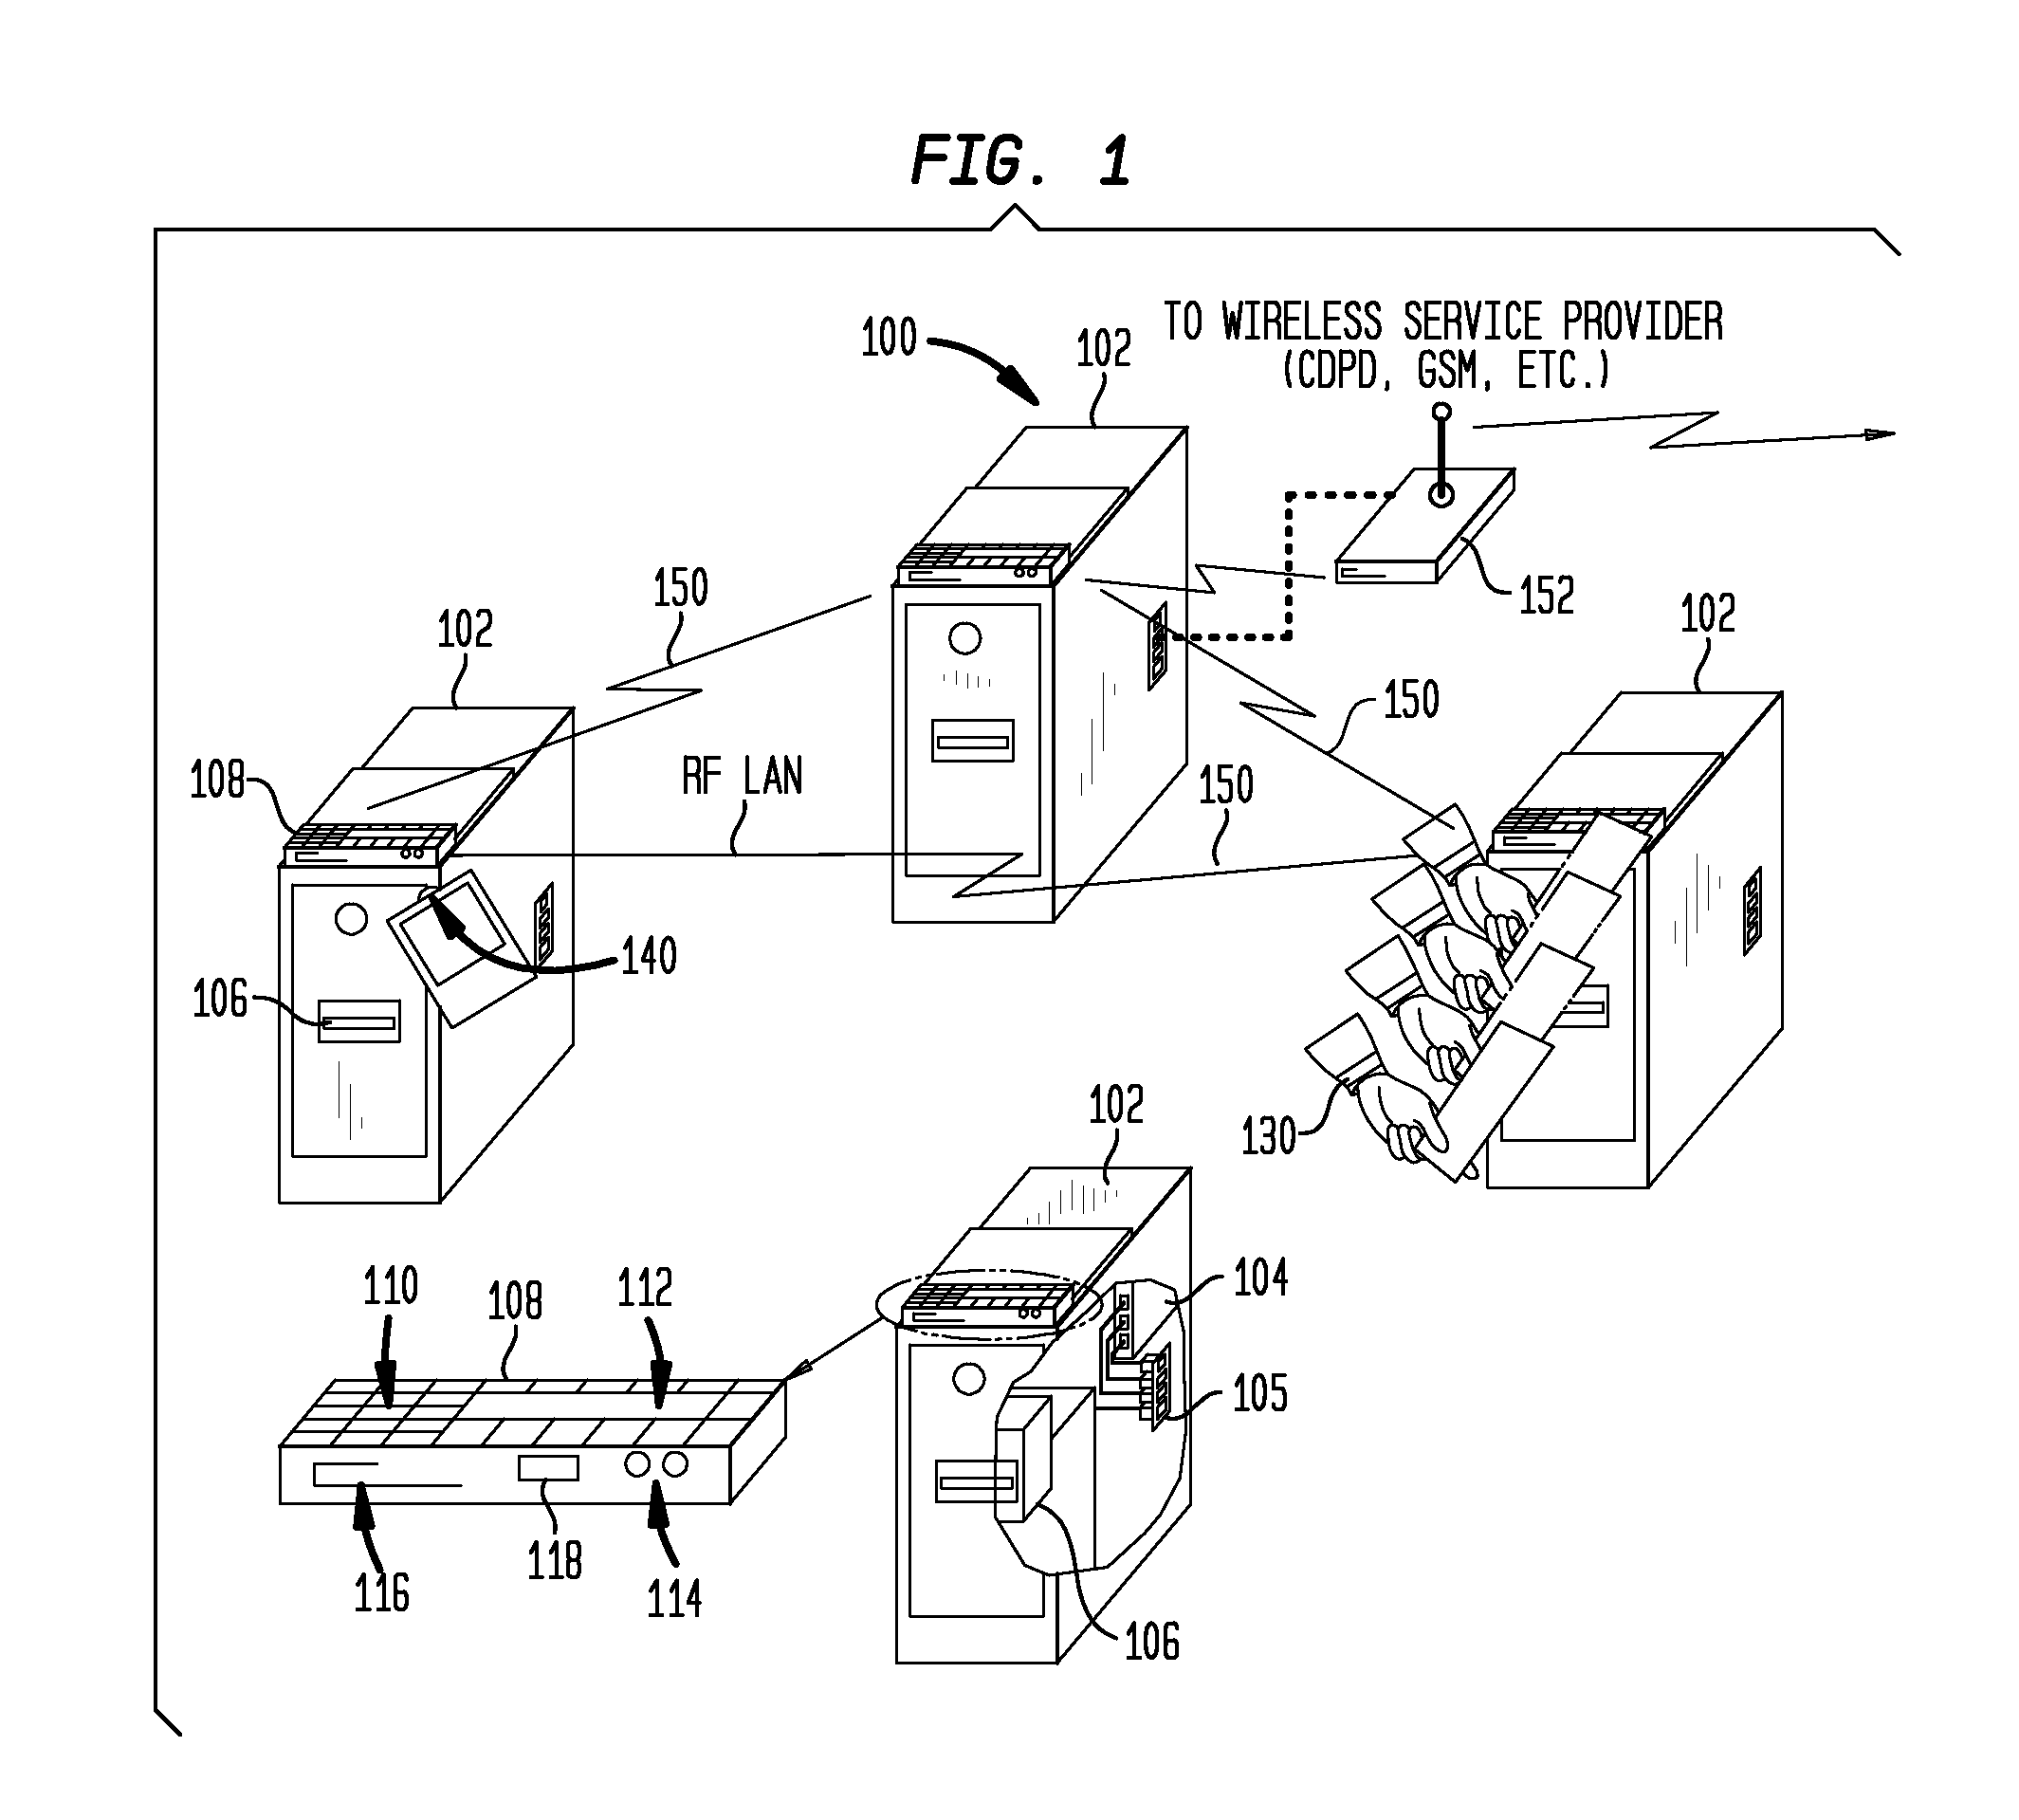 Methods and apparauts for an electronic drop safe